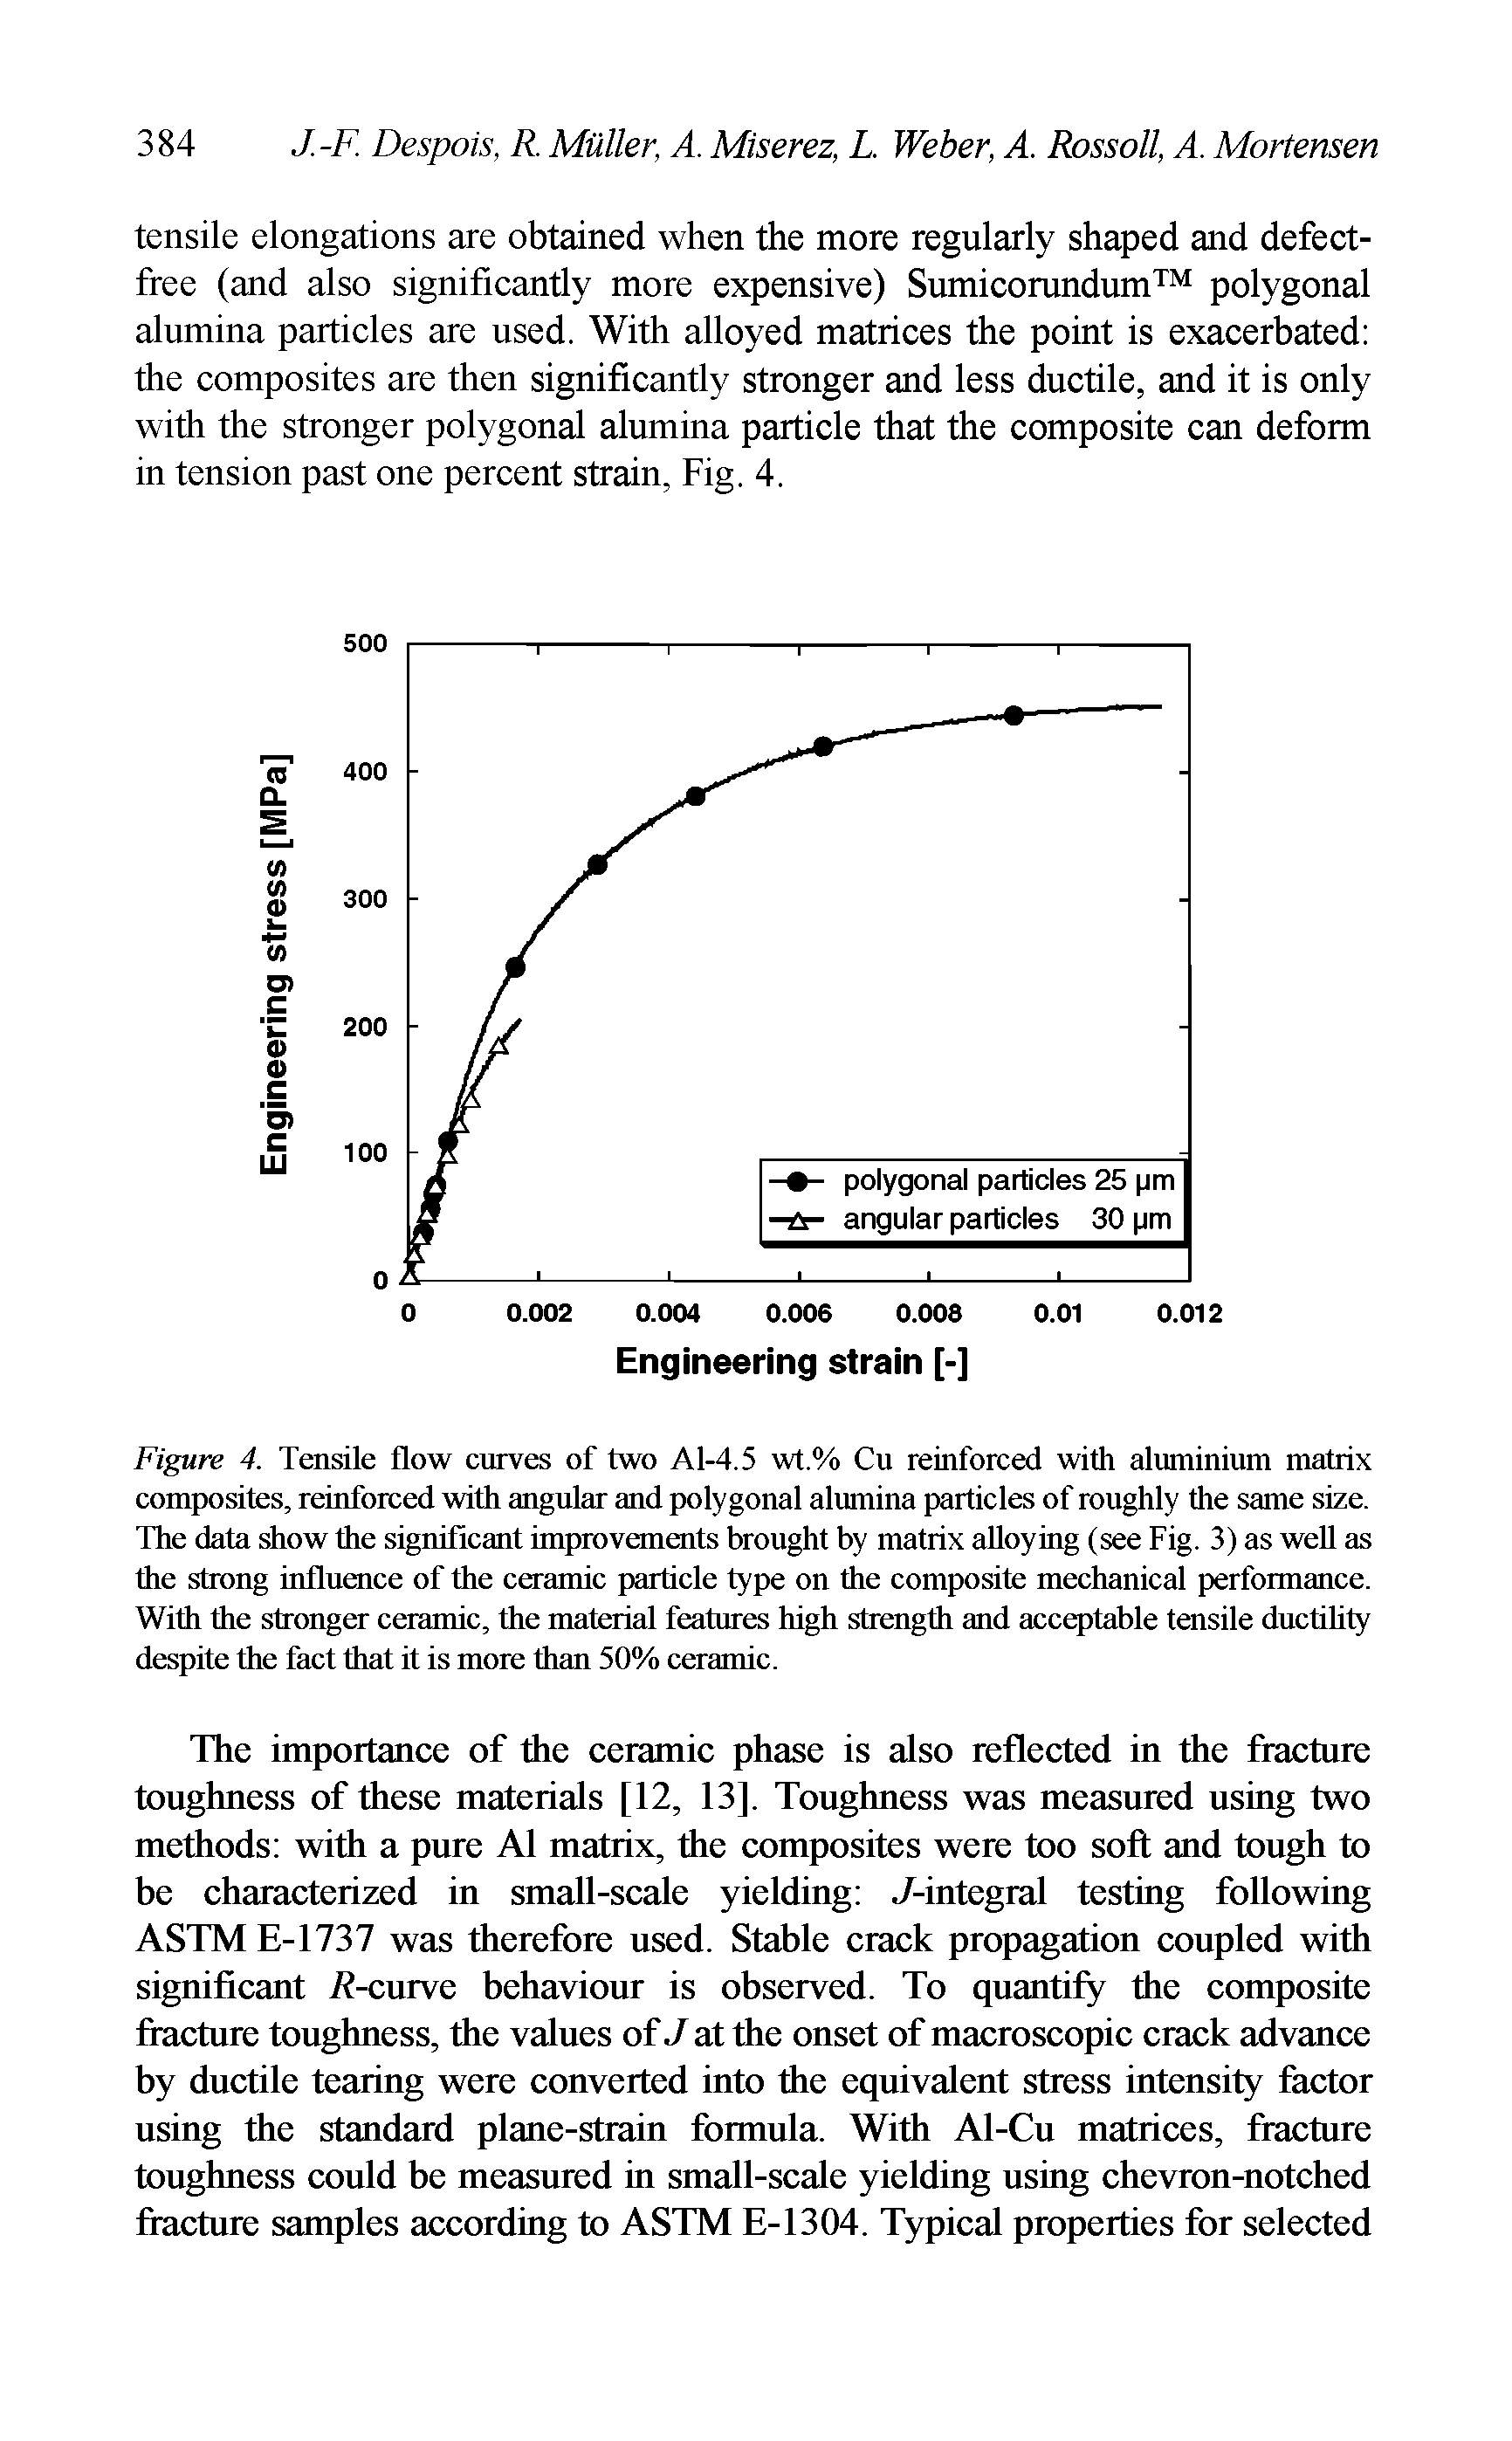 Figure 4. Tensile flow curves of two Al-4.5 wt.% Cu reinforced with aluminium matrix composites, reinforced with angular and polygonal alumina particles of roughly the same size. The data show the significant improvements brought by matrix alloying (see Fig. 3) as well as the strong influence of the ceramic particle type on the composite mechanical performance. With the stronger ceramic, the material features high strength and acceptable tensile ductility despite the fact that it is more than 50% ceramic.